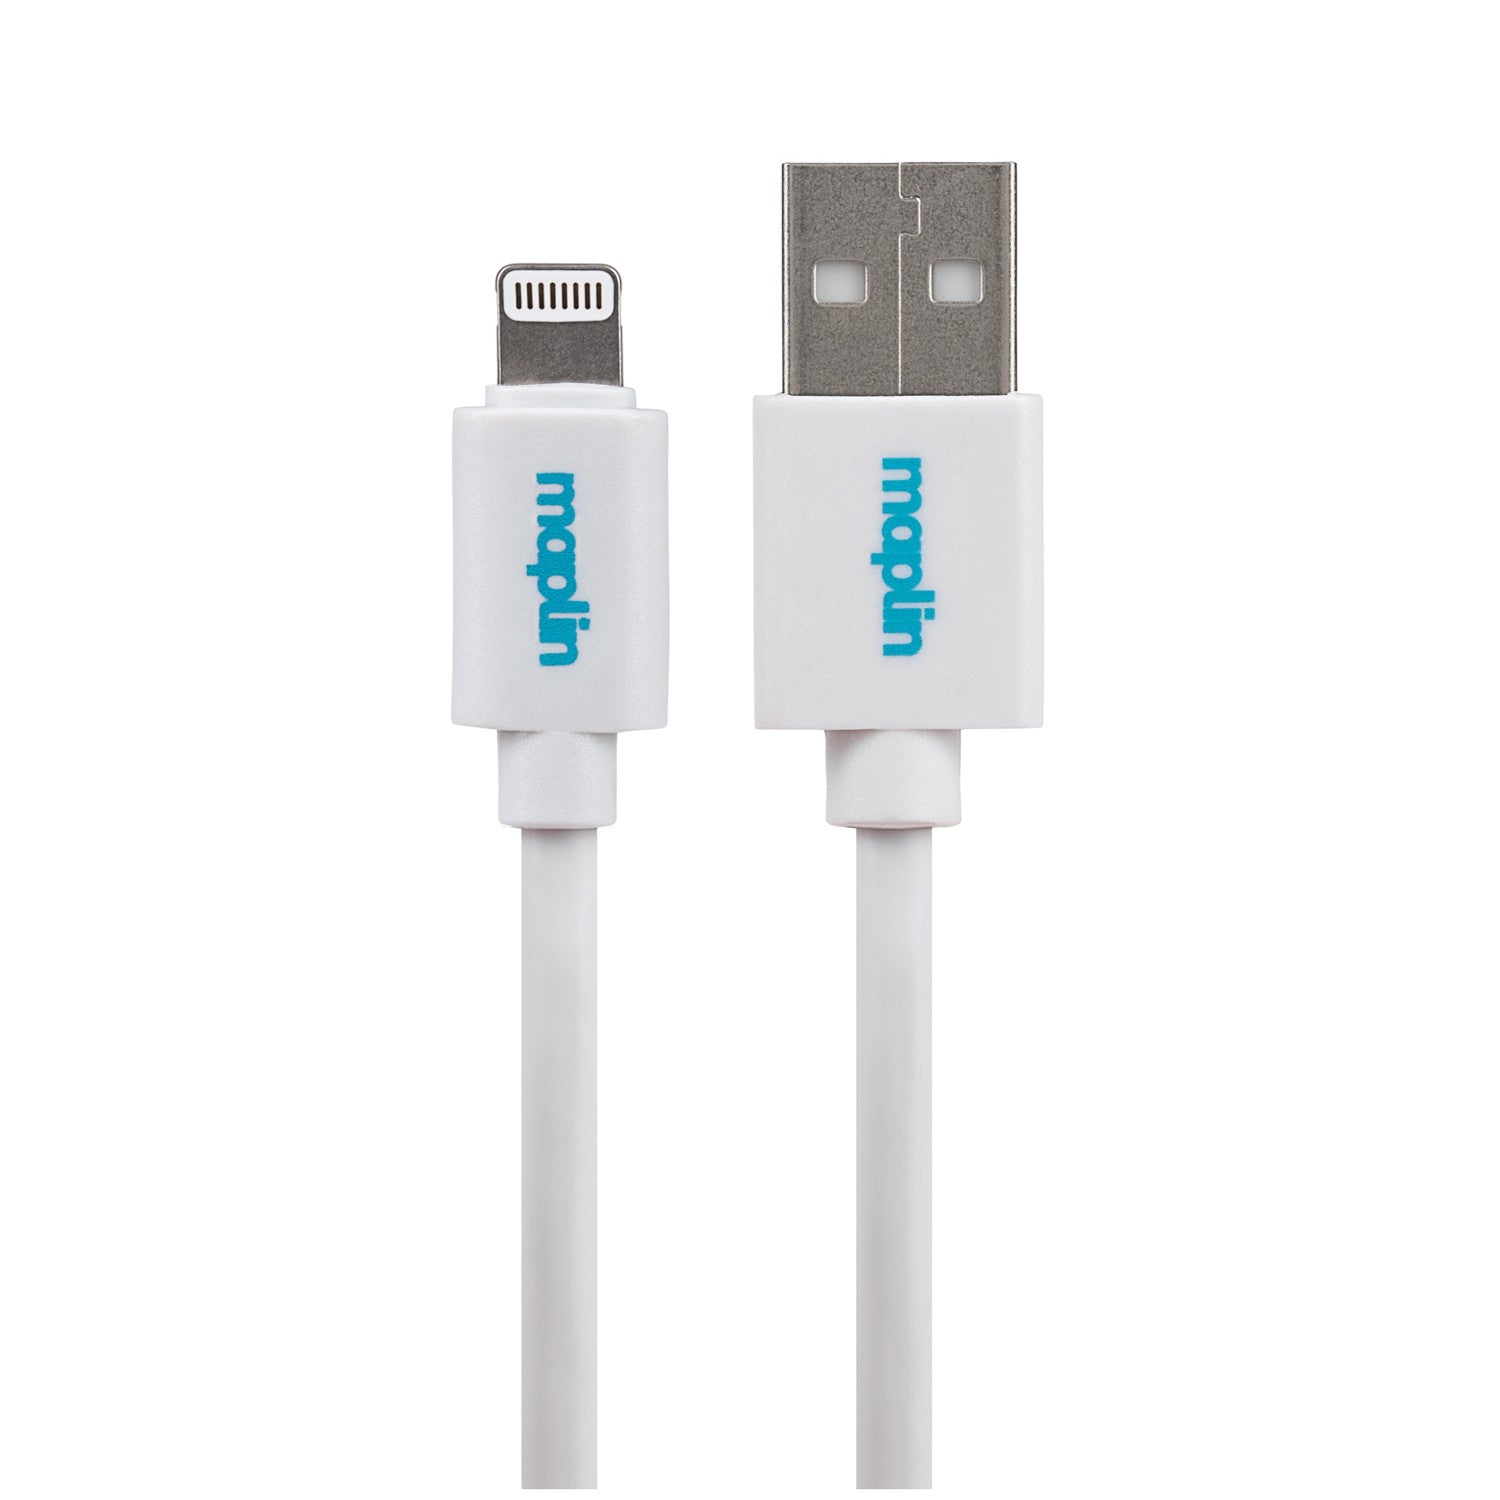 Maplin Premium Apple MFI Certified Tangle-Free Lightning to USB-A 2.0 Cable - White, 1.5m - maplin.co.uk